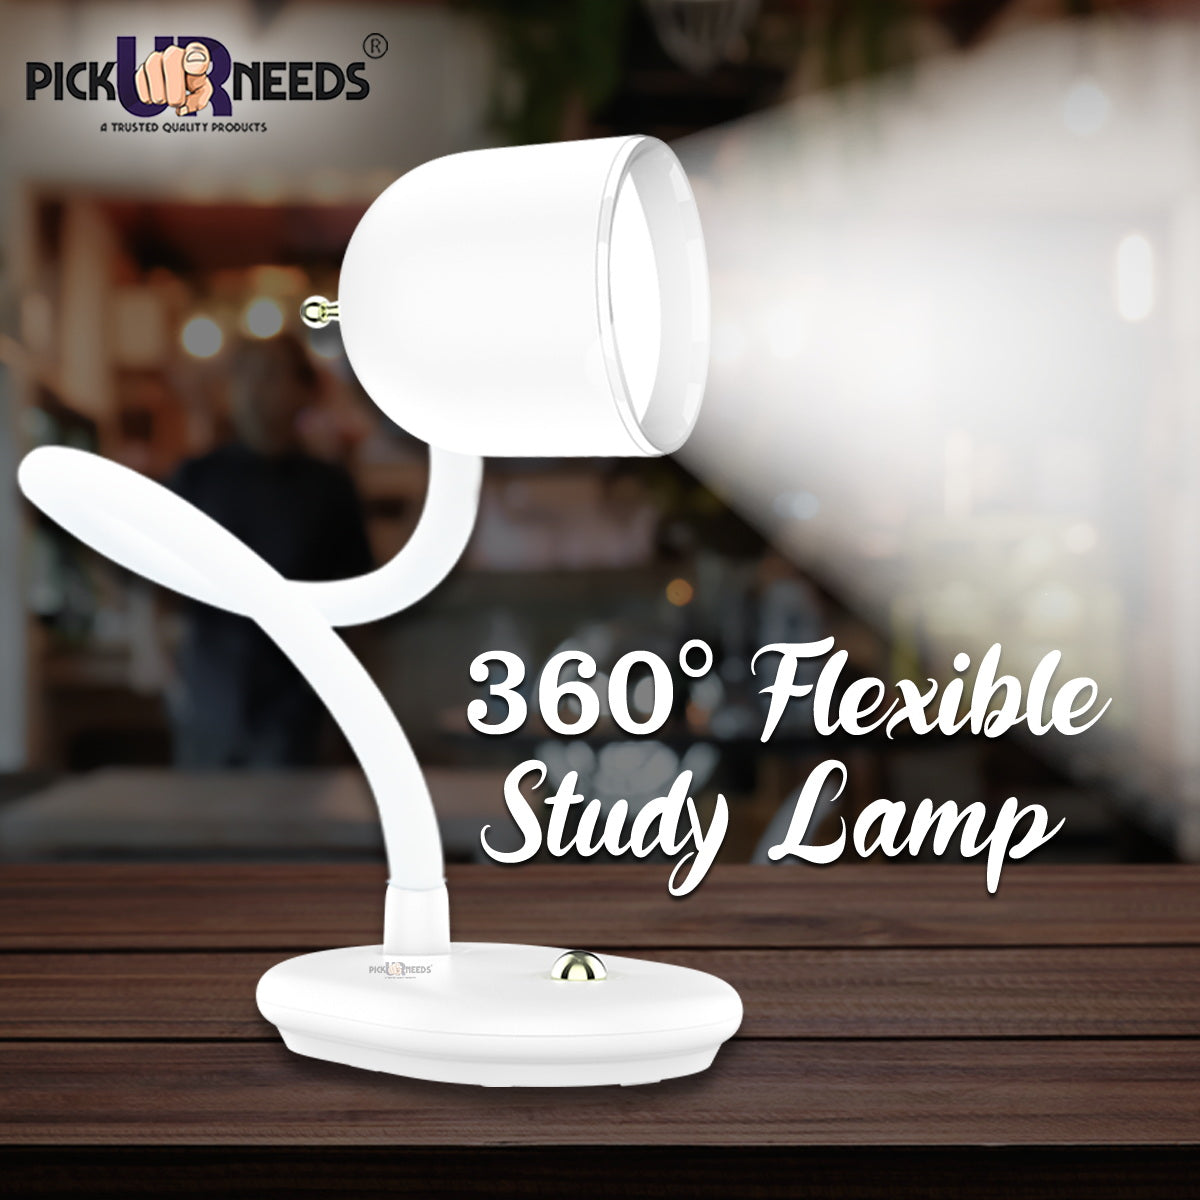 Pick Ur Needs Rechargeable Led Desk Lamp / Table Lamp, 360 Flexible With USB Charging Cable